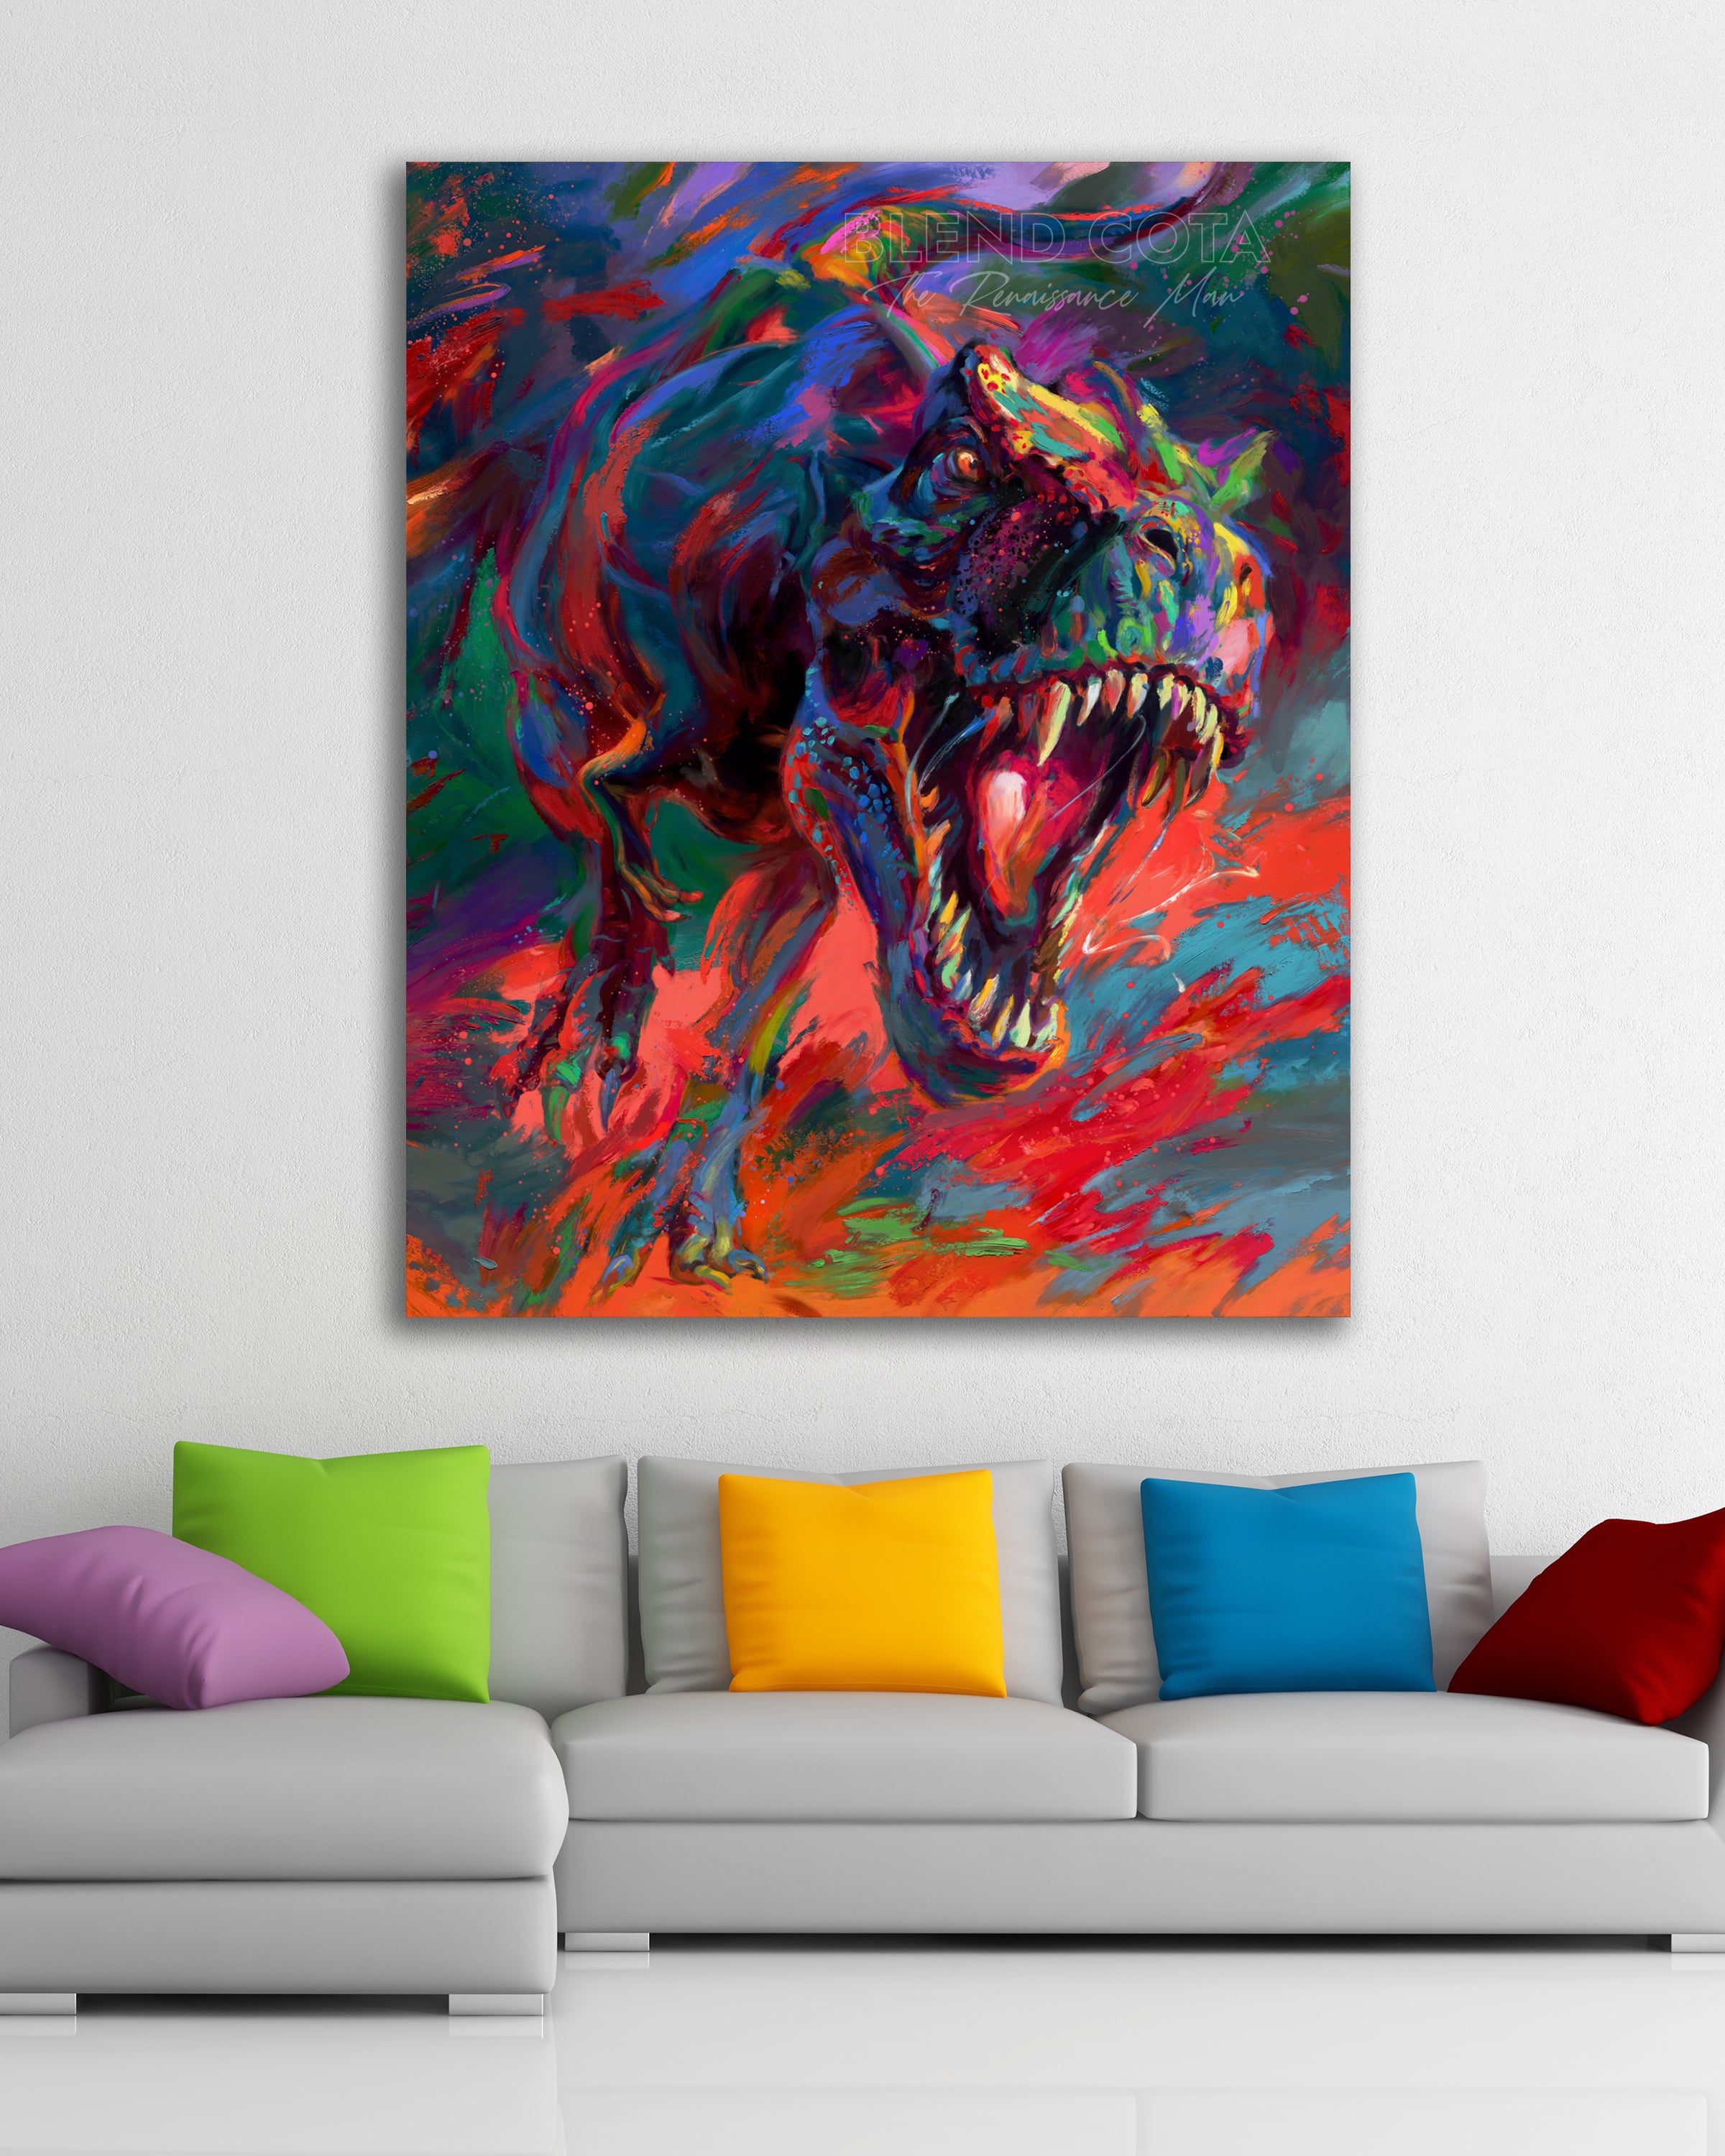 Limited edition glossy metal print of the t-rex from jurassic period the apex dinosaur predator jaw full of teeth chasing you, painted with colorful brushstrokes in an expressionistic style in a room setting.